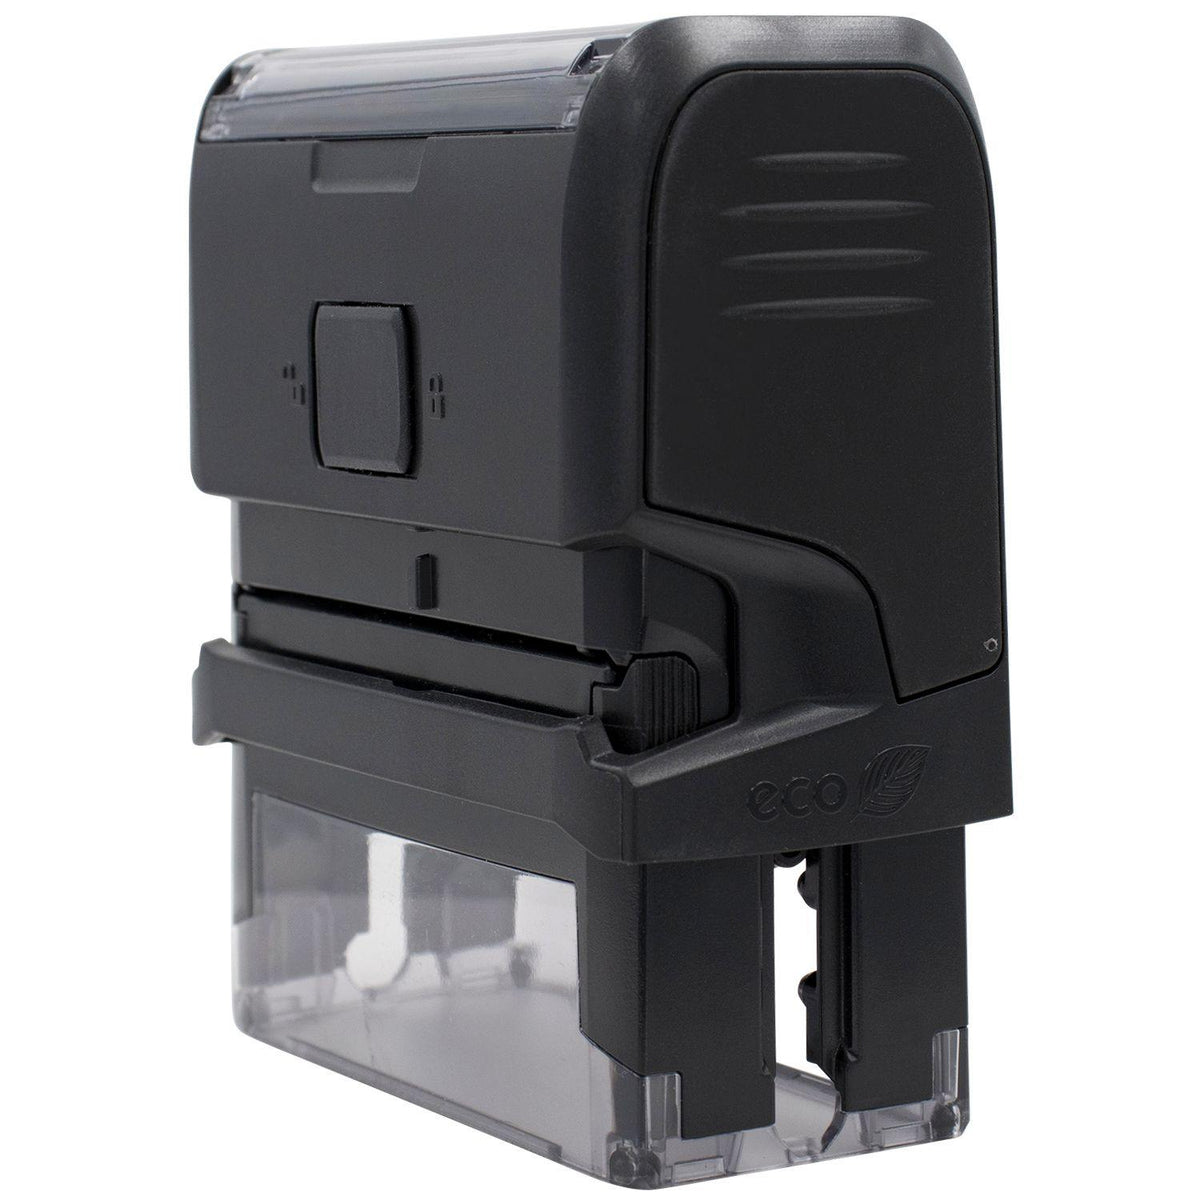 Self Inking Bc Bs Stamp - Engineer Seal Stamps - Brand_Trodat, Impression Size_Small, Stamp Type_Self-Inking Stamp, Type of Use_Medical Office